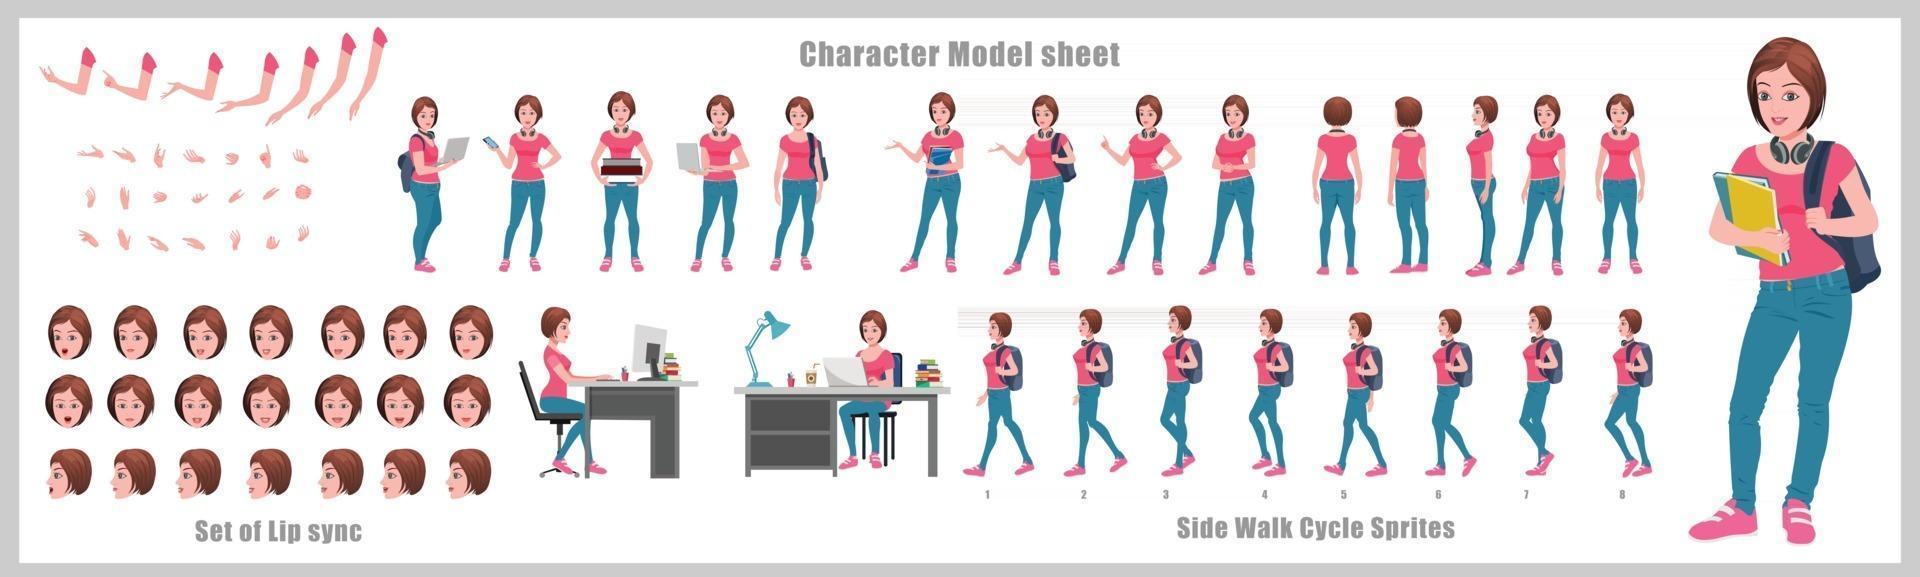 Girl student Character Design Model Sheet Girl Character design Front side back view and explainer animation poses Character set with lip sync Animation sequence of all front Back and side walk cycle animation sequences vector